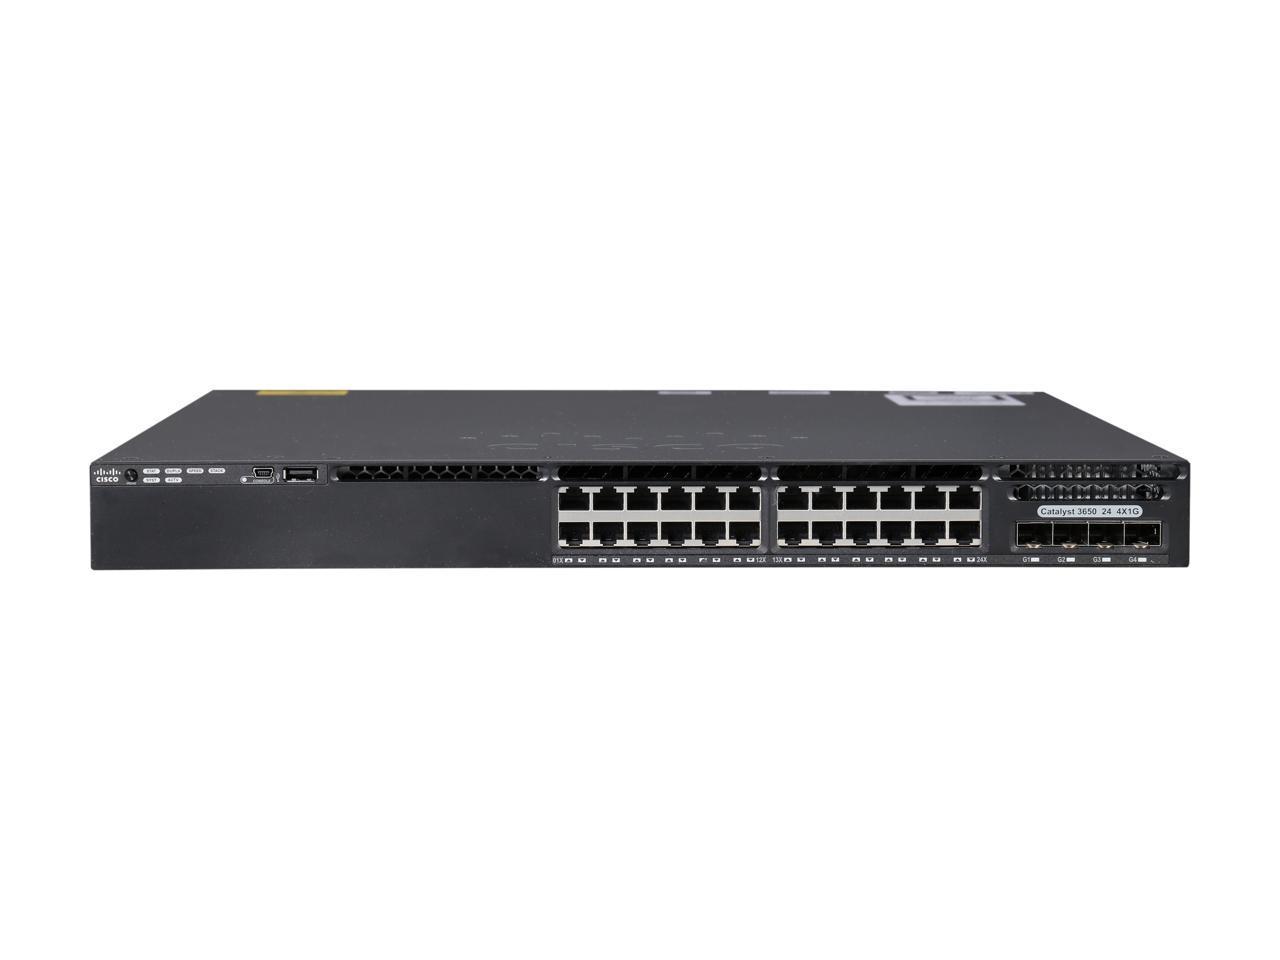 Cisco 24 port 2 Layer Supported Catalyst Managed Ethernet Switch Model WS-C3650-24TS-L